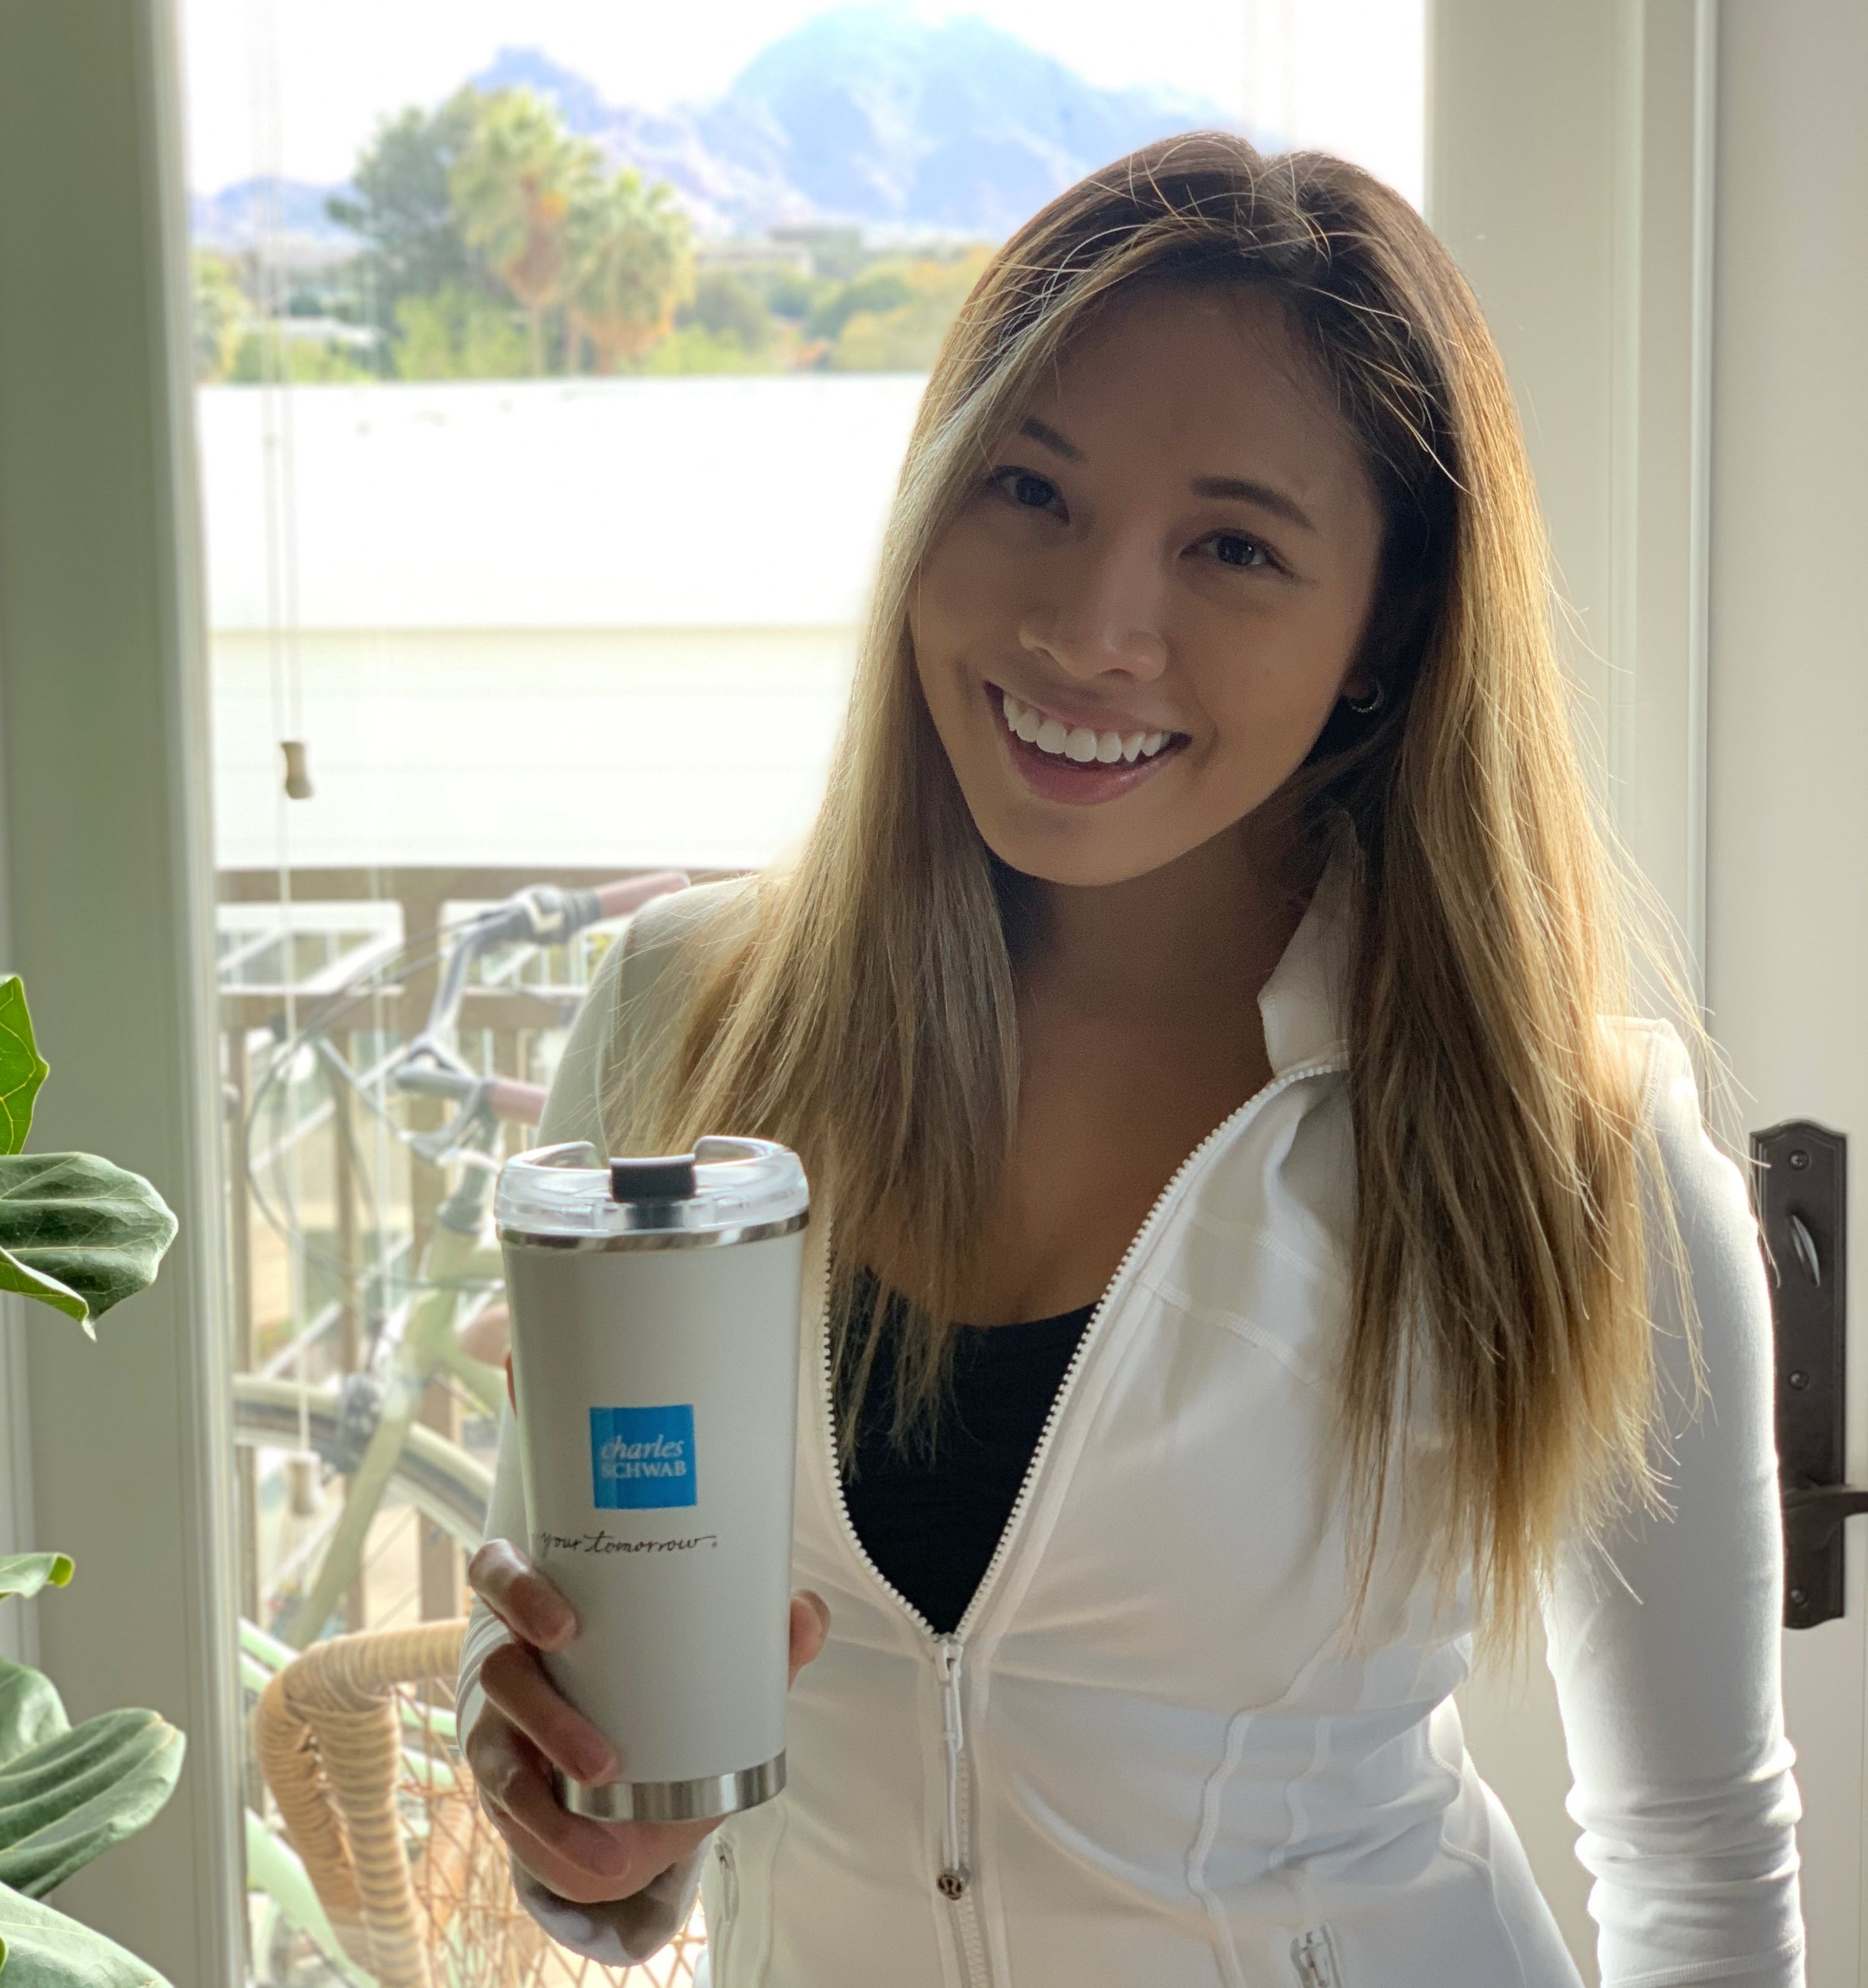 Katerina holding a Schwab thermos